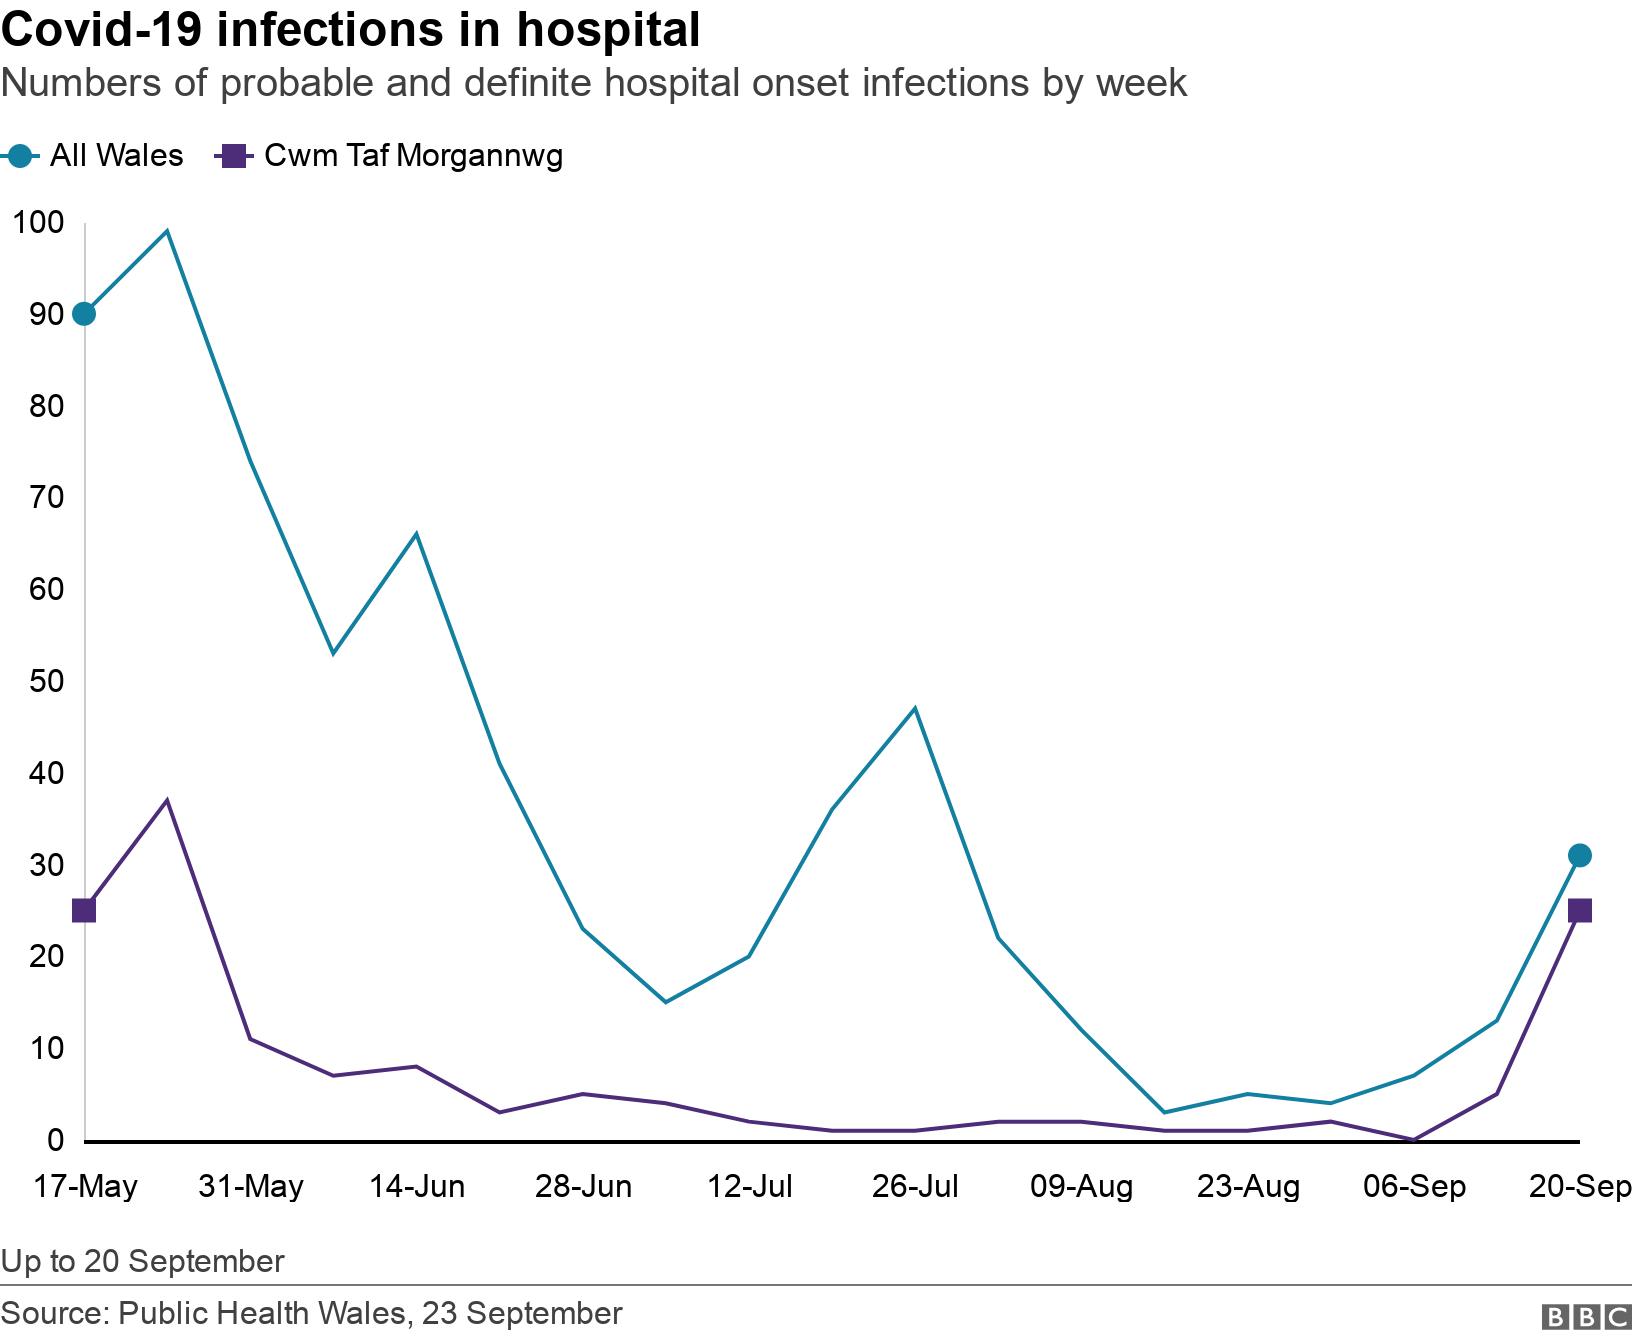 Covid-19 infections in hospital. Numbers of probable and definite hospital onset infections by week. Up to 20 September.